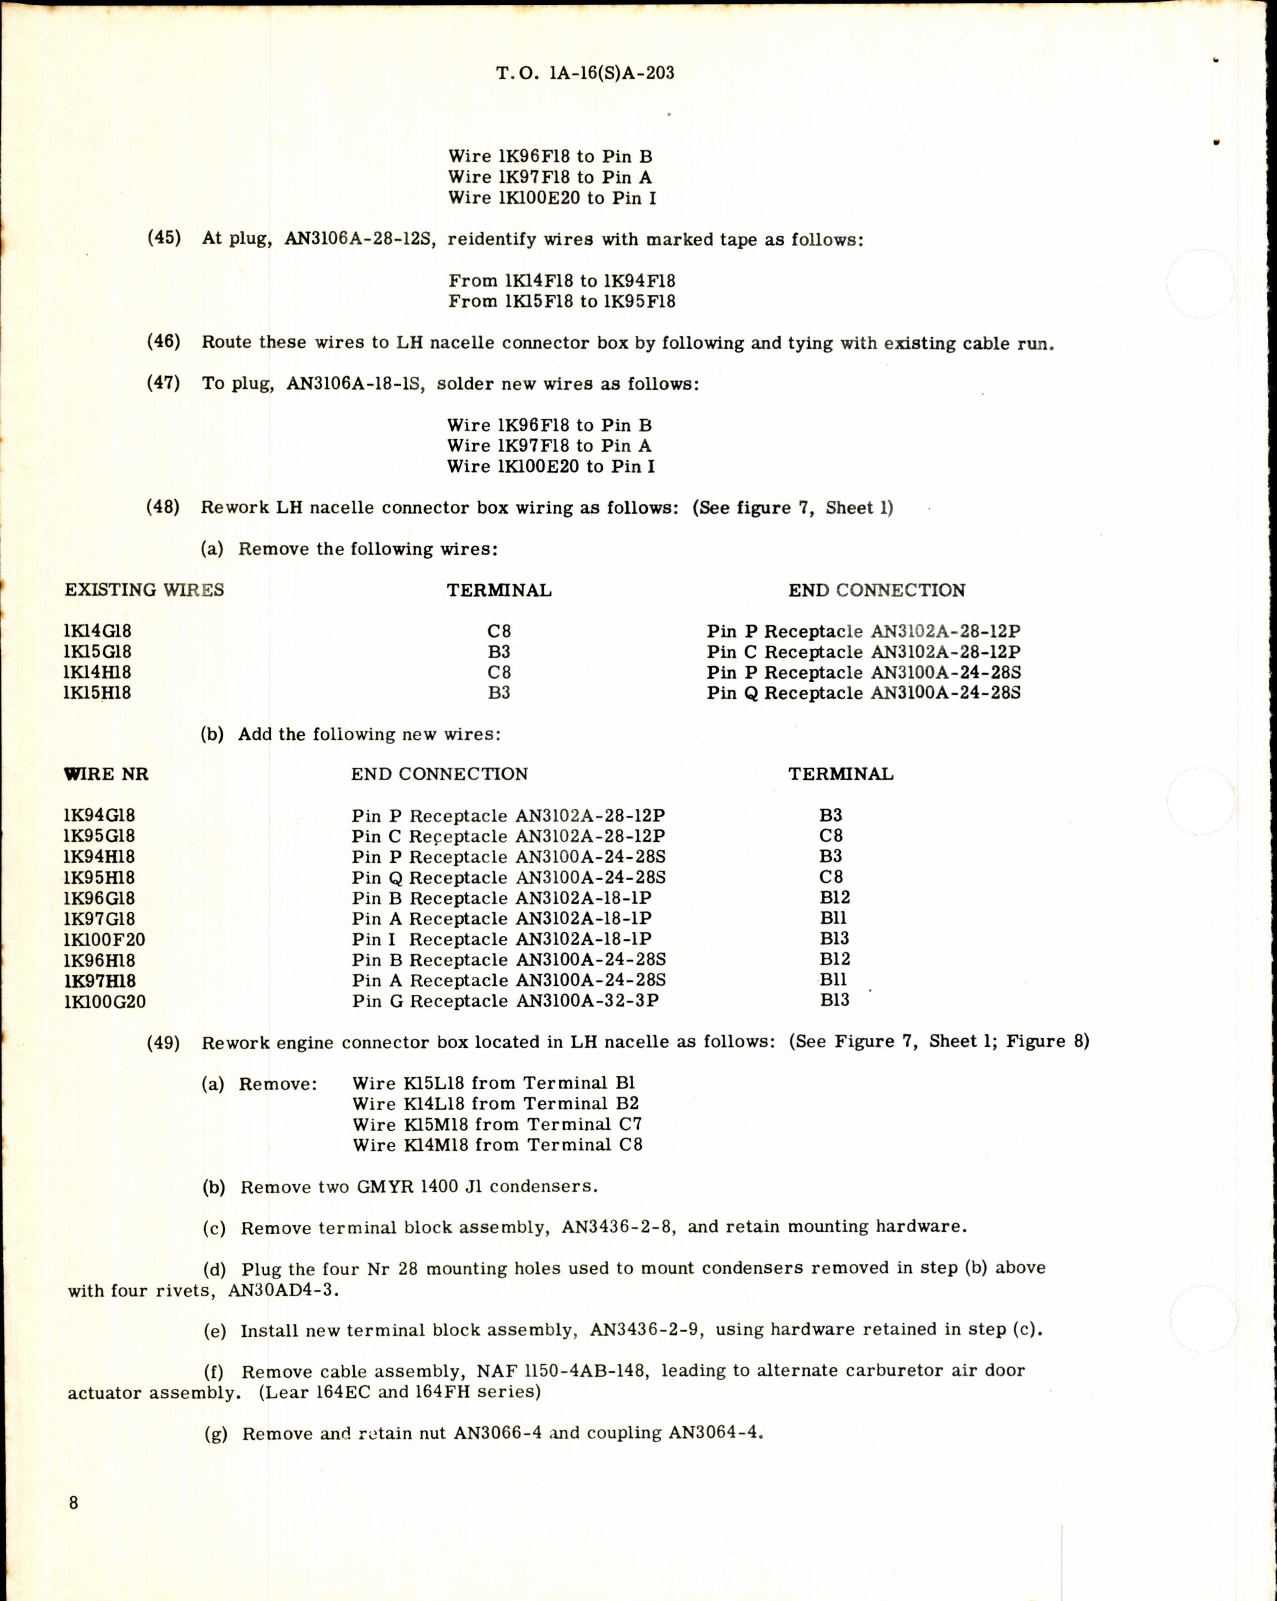 Sample page 8 from AirCorps Library document: Modification of Power Plant Carburetor Air Induction System for SA-16A Aircraft